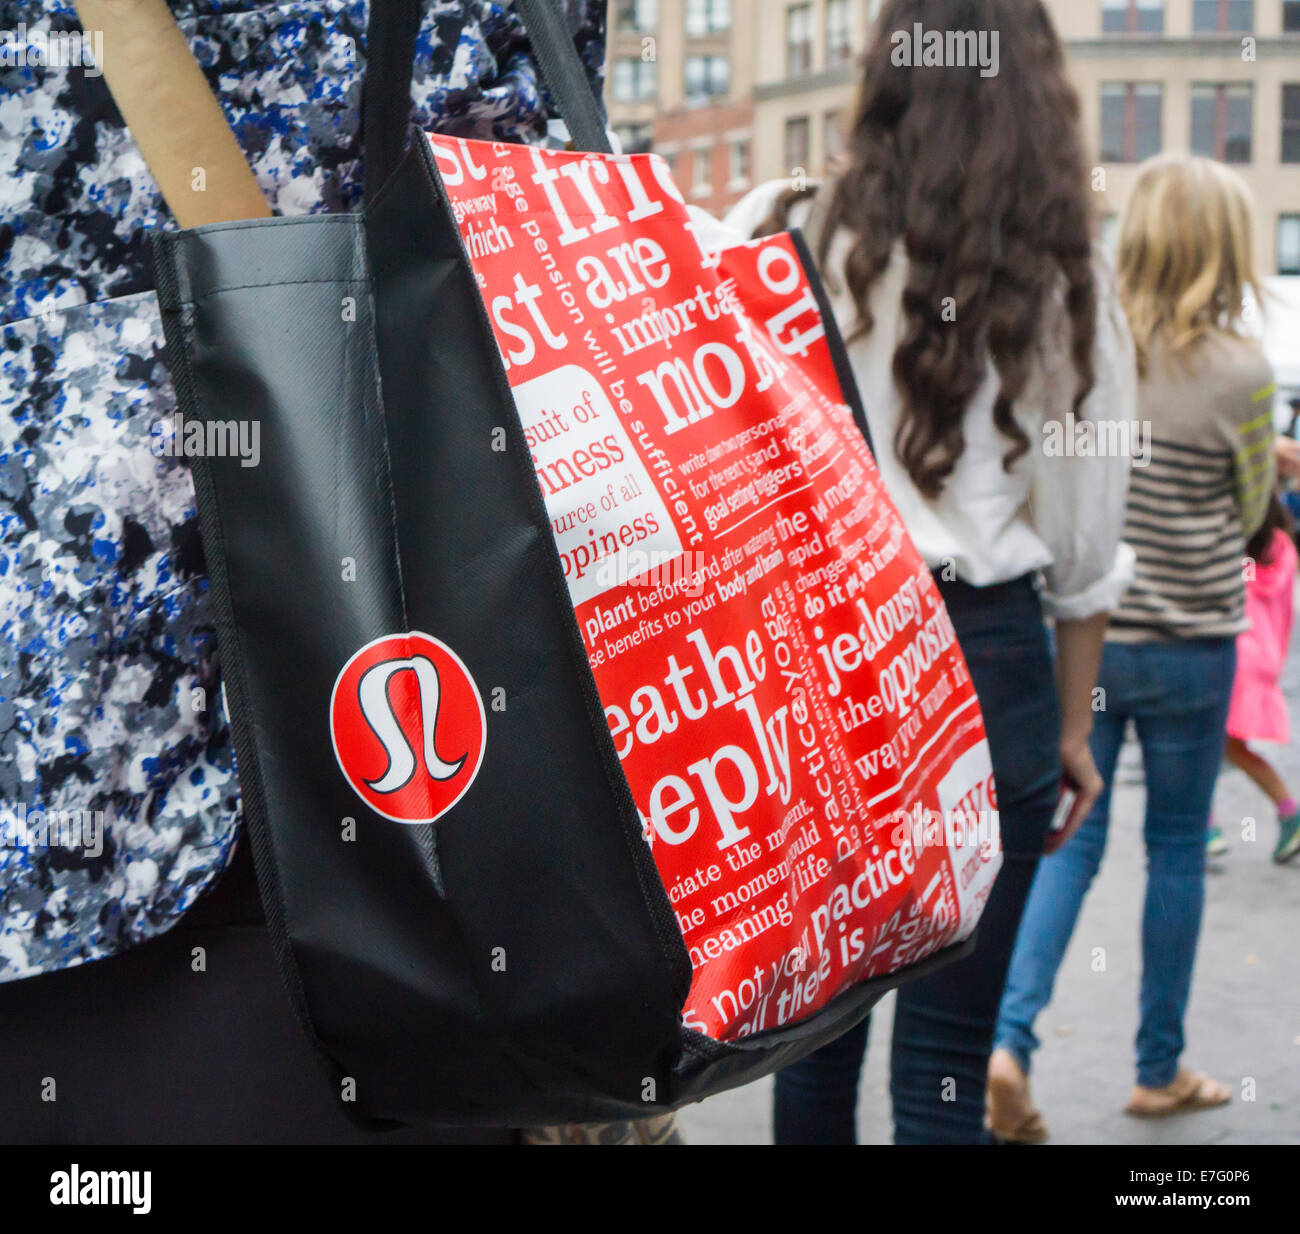 https://c8.alamy.com/comp/E7G0P6/a-woman-with-her-lululemon-athletica-shopping-bag-in-the-new-york-E7G0P6.jpg